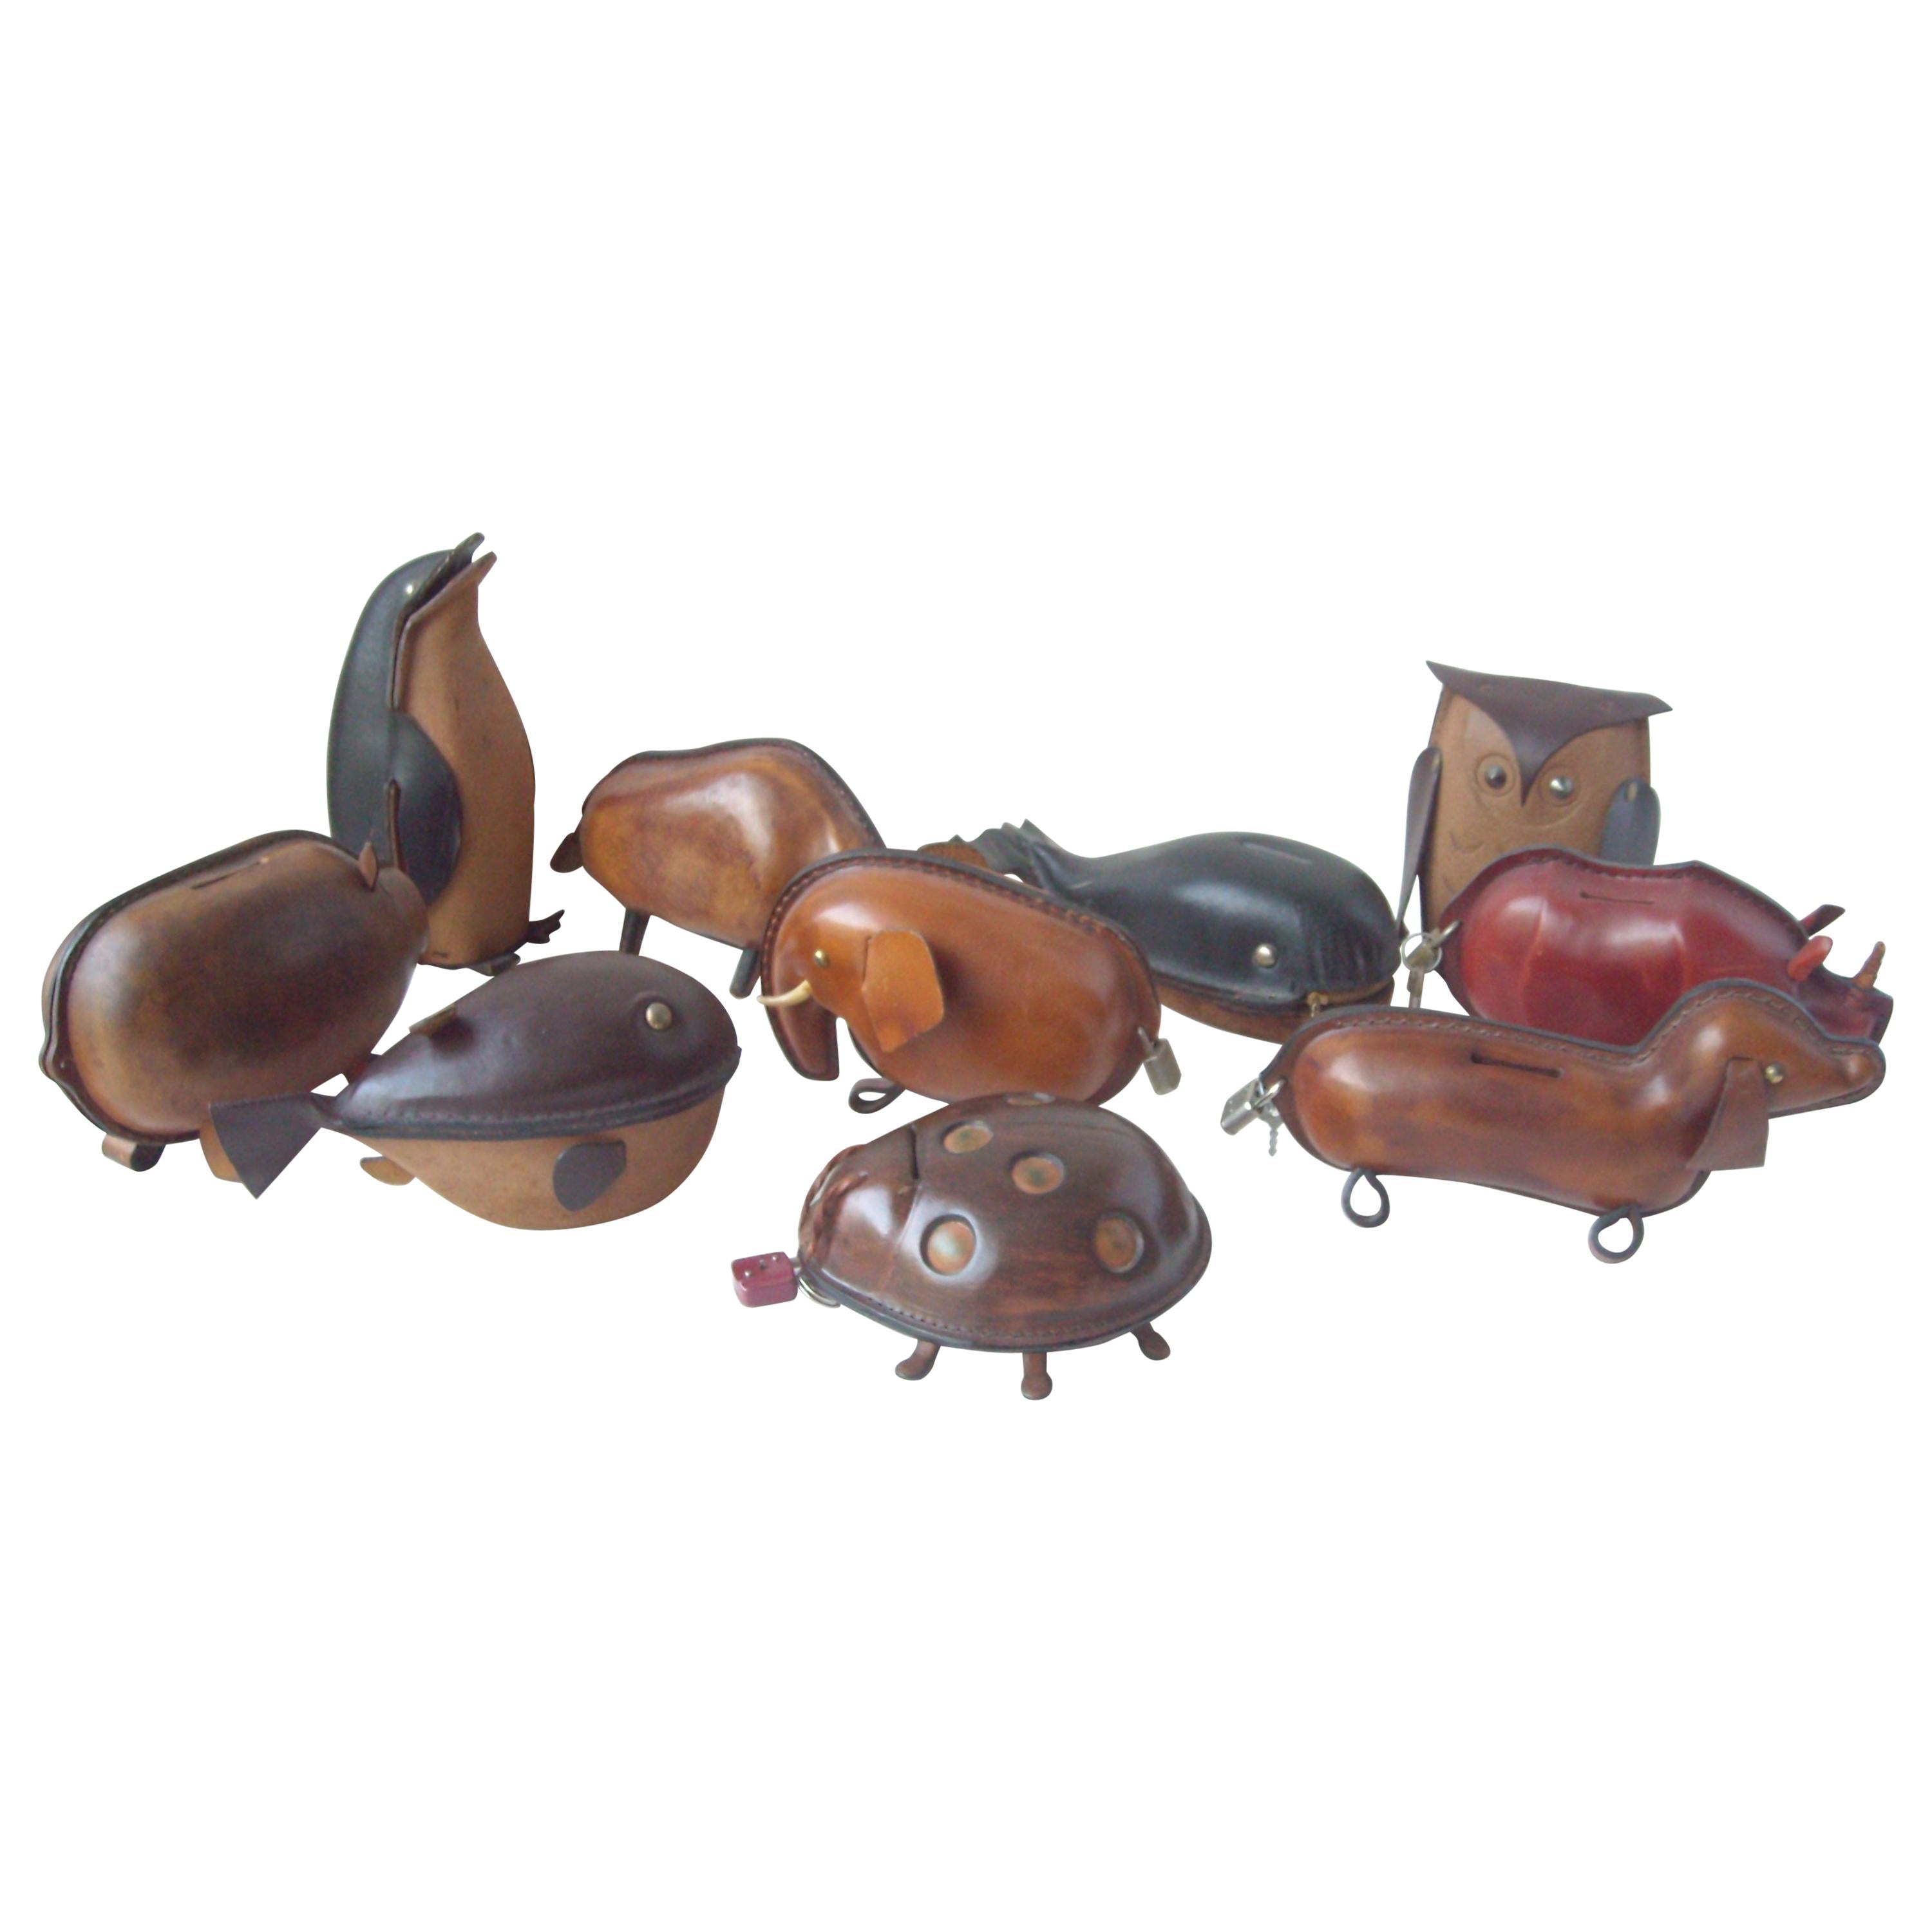 Kounoike Leather MCM, Collection of 10 Coin/Money Banks Animals